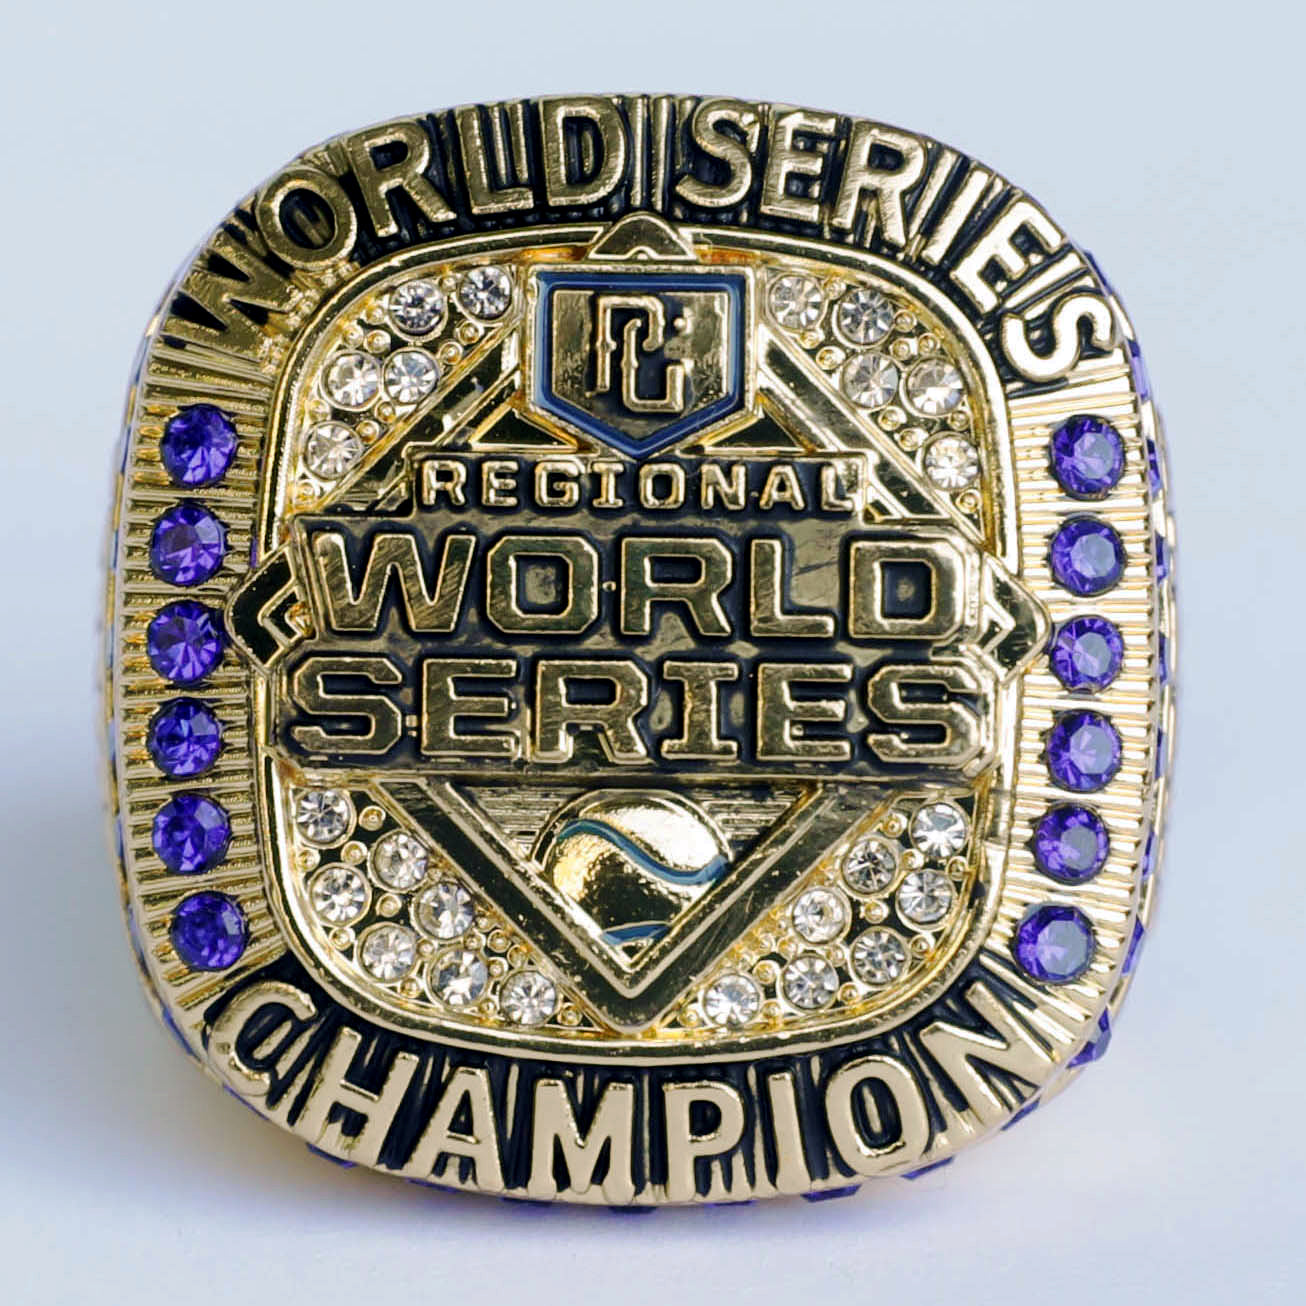 Perfect Game Regional World Series Ring Champion – Global Awards